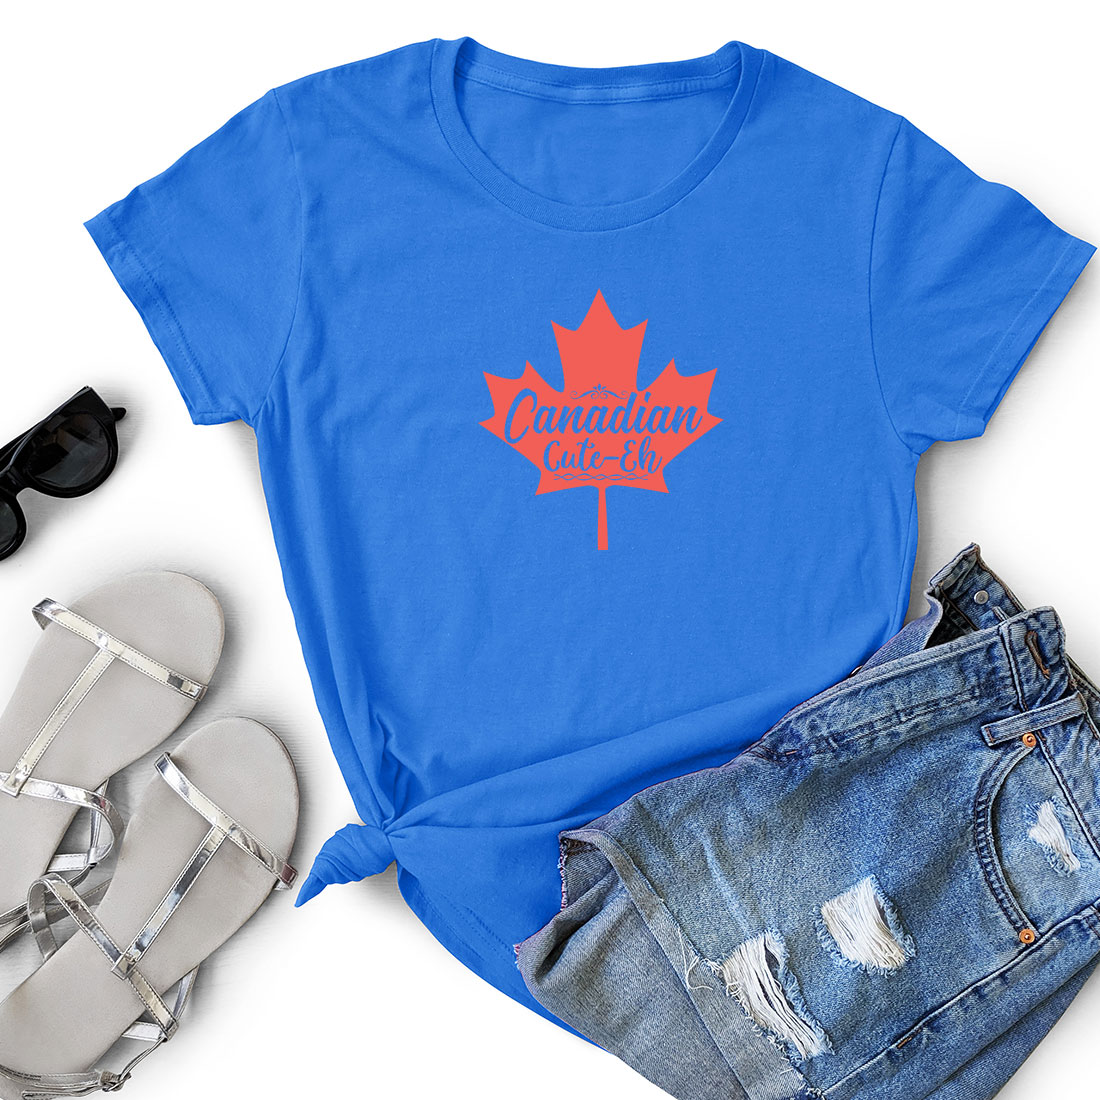 Blue shirt with a red maple leaf on it.